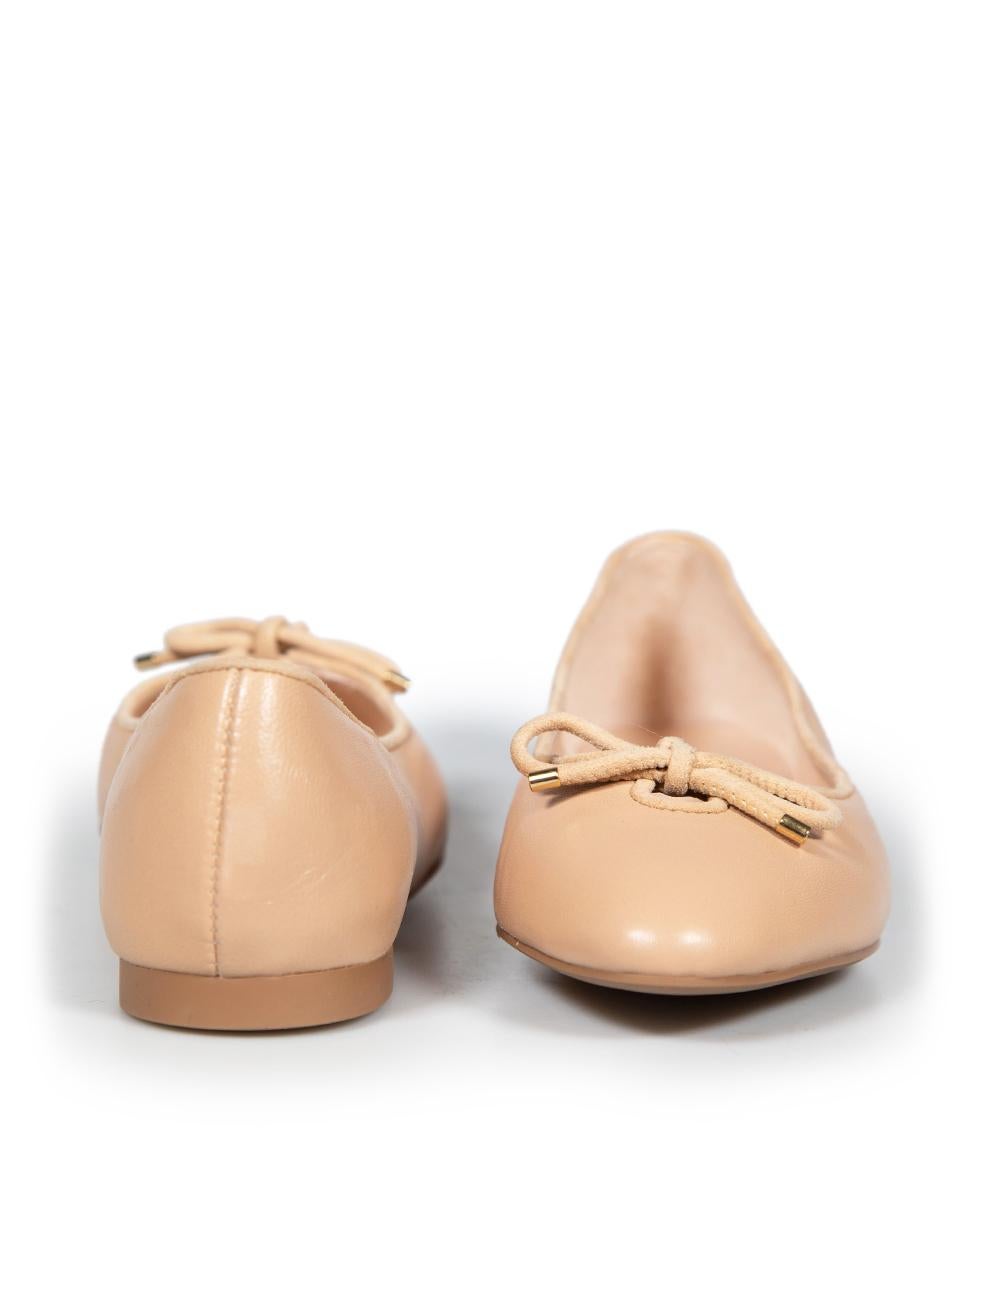 Stuart Weitzman Beige Leather Bow Front Flats Size EU 36.5 In Excellent Condition For Sale In London, GB